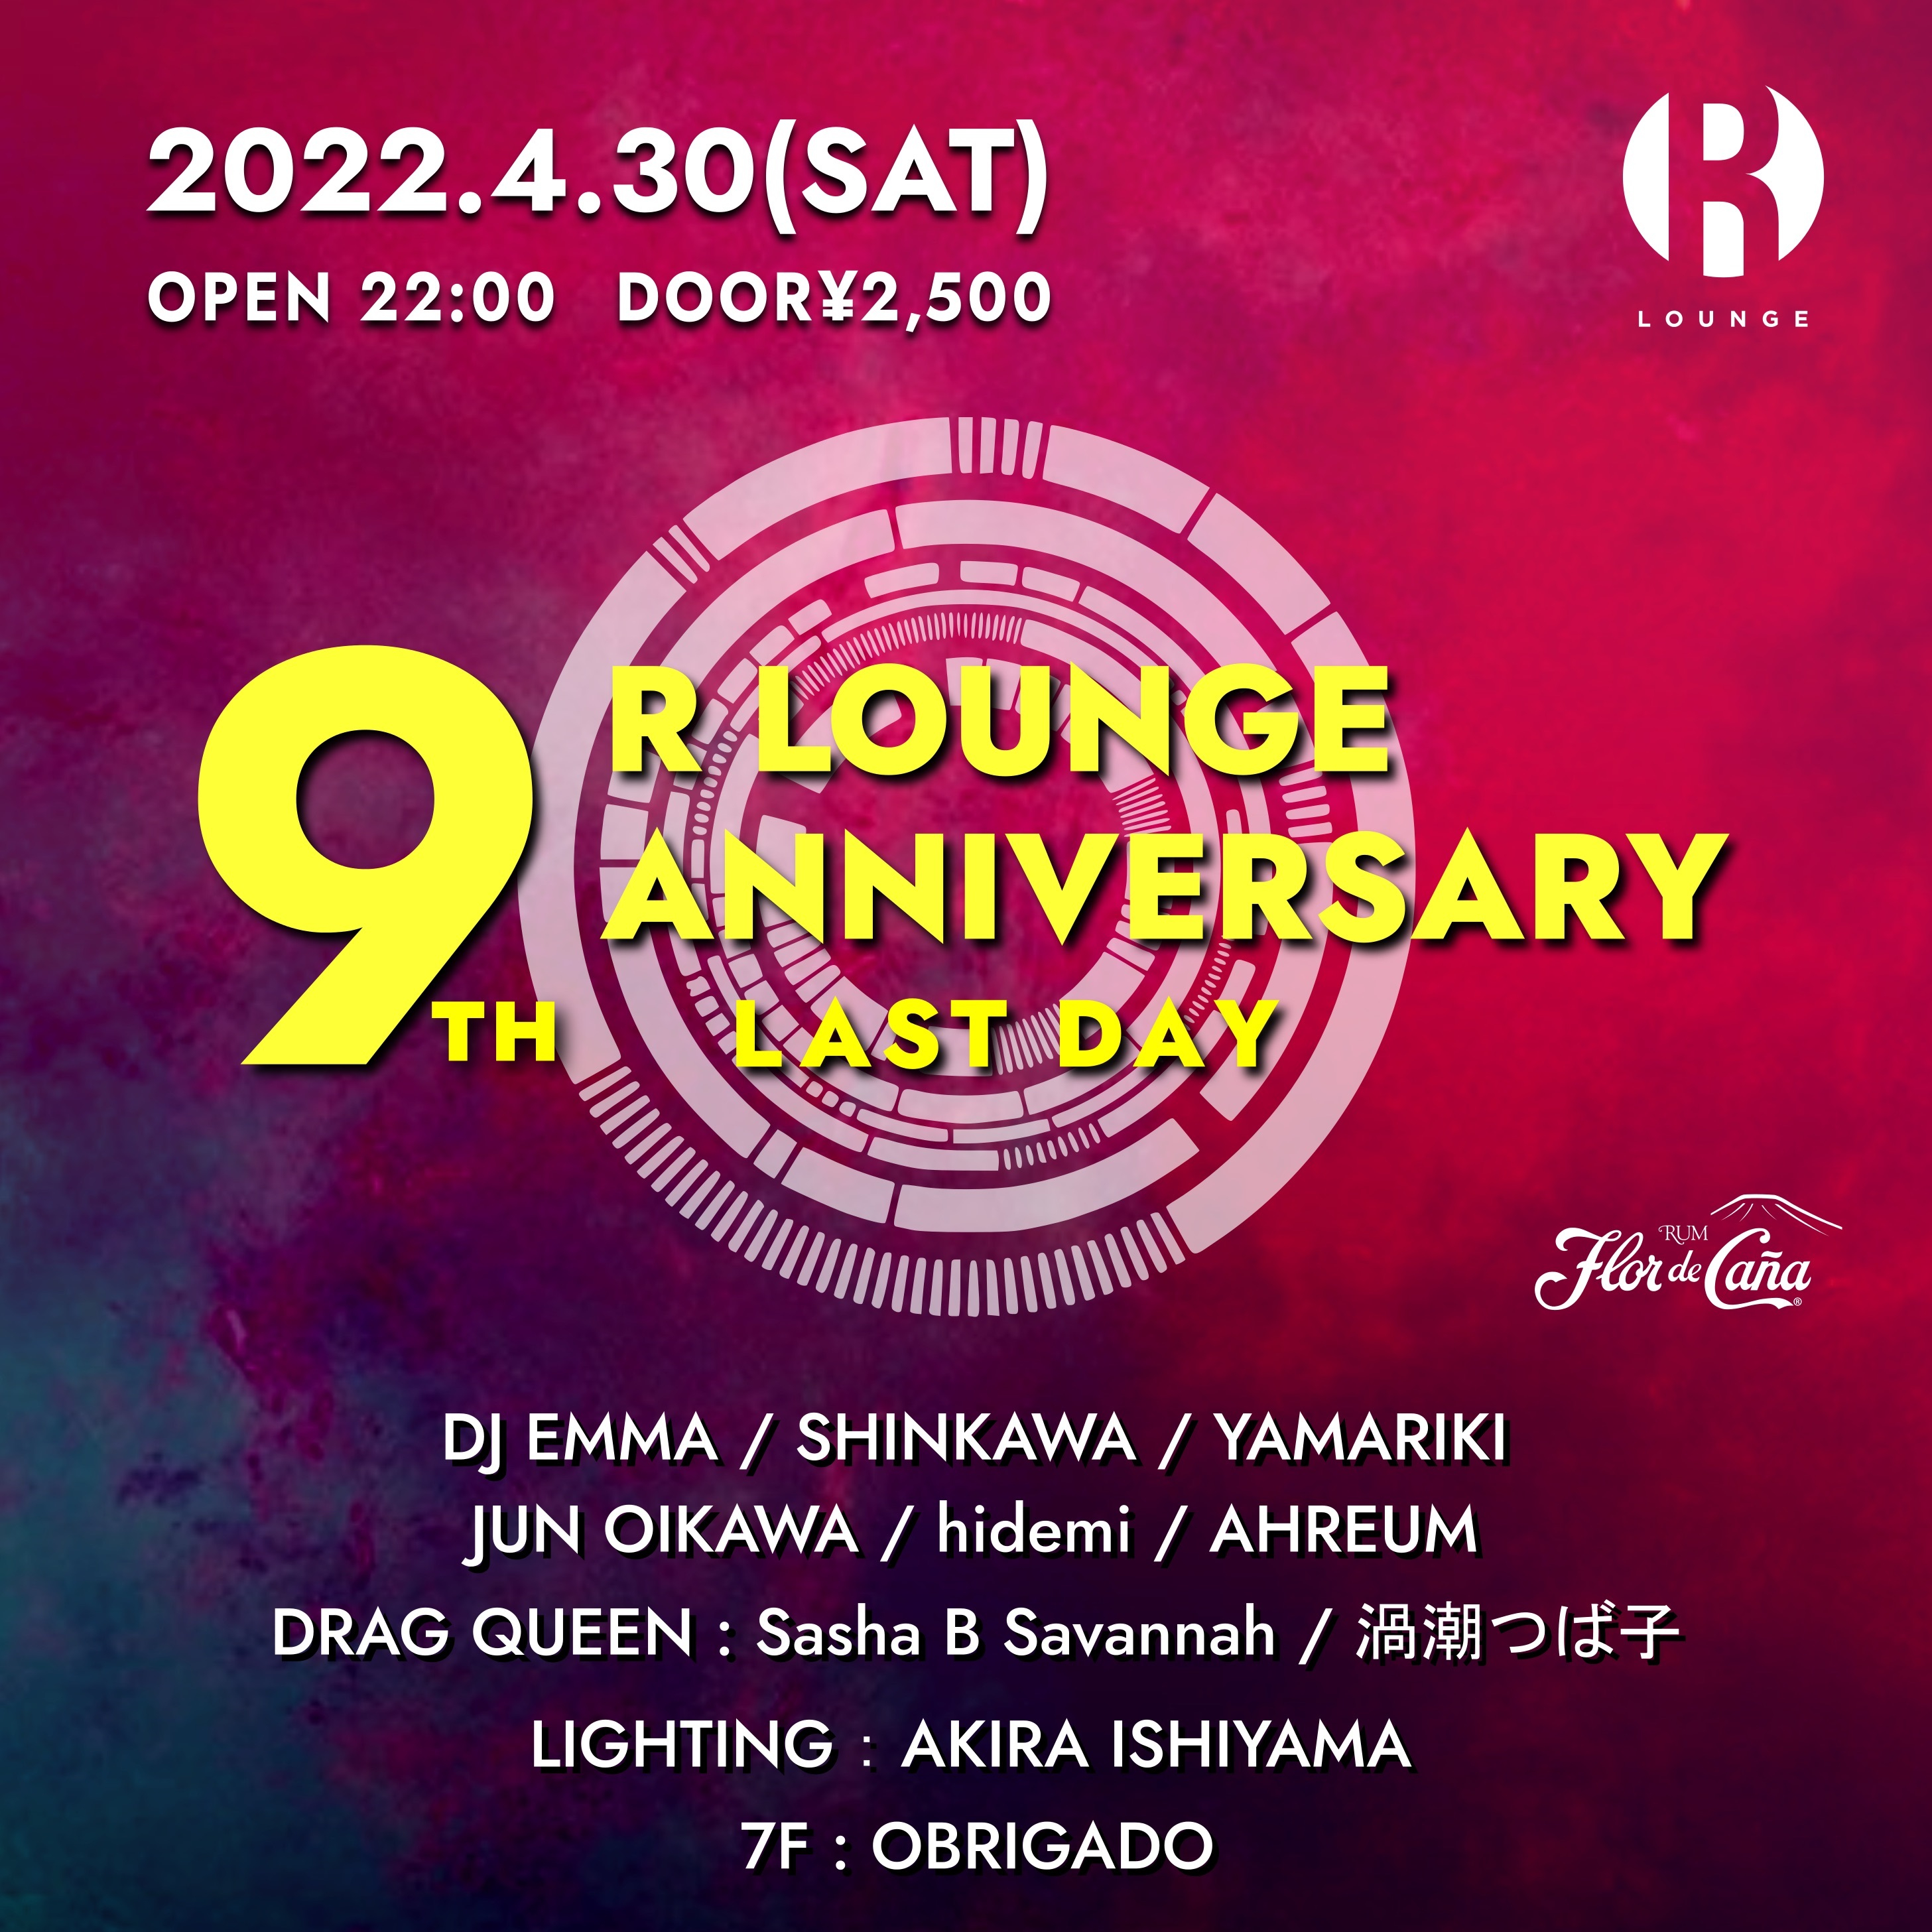 R Lounge 9th Anniversary Last Day - Flyer back